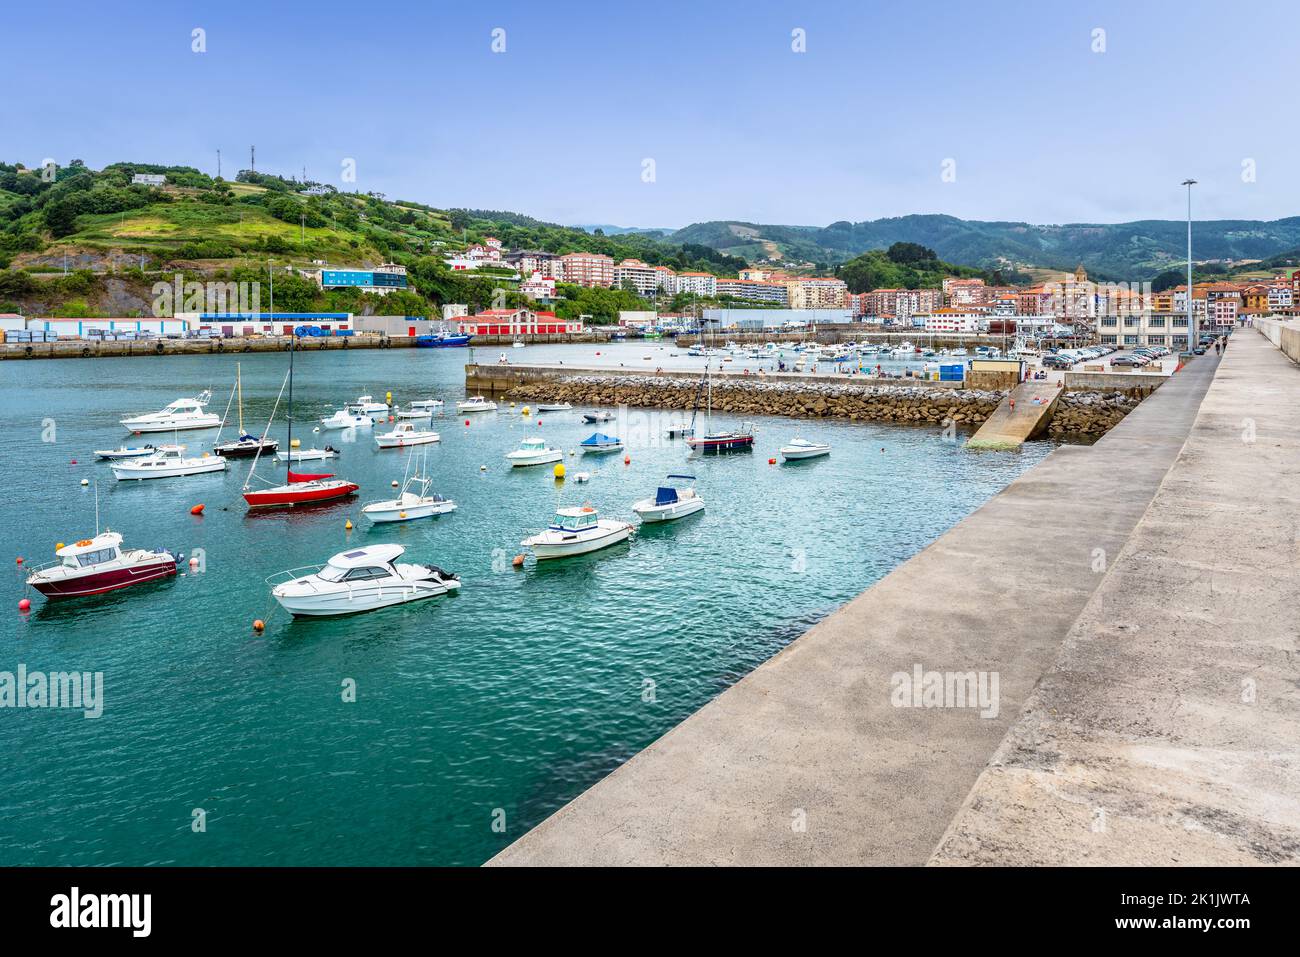 Bermeo, Spain. Picturesque small town on the coast of Cantabrian Sea Stock Photo